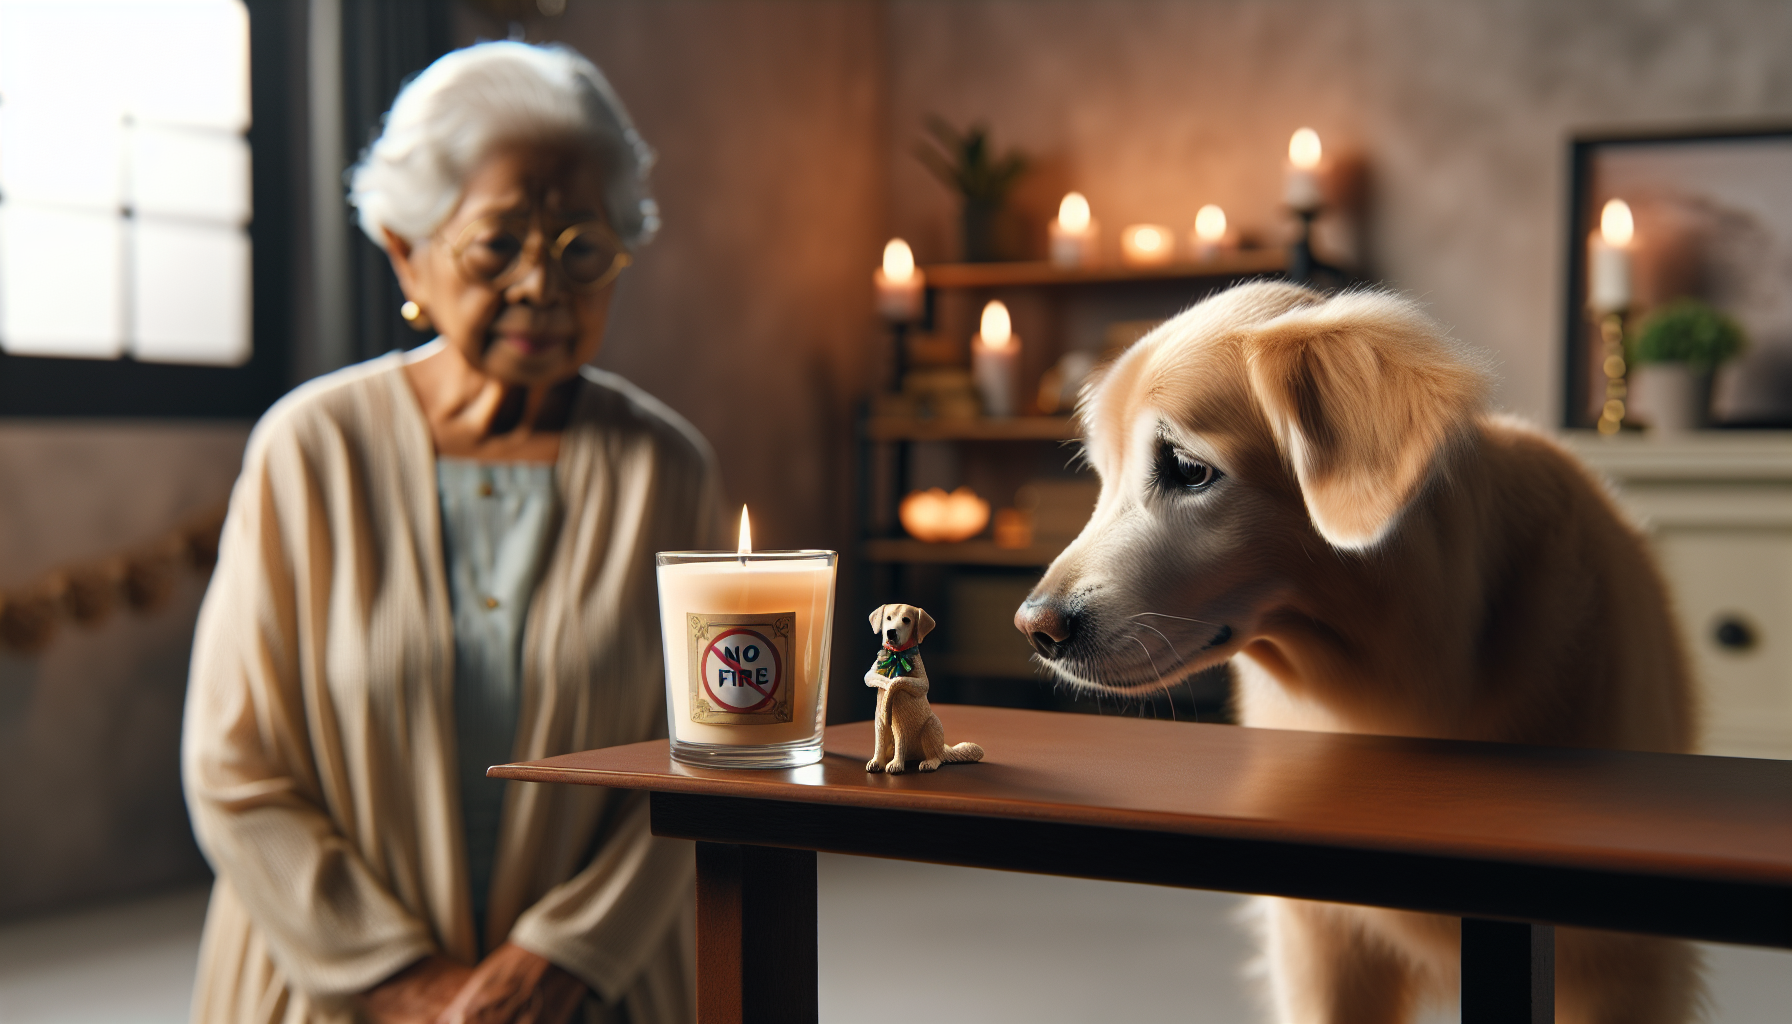 Elderly woman watching dog near lit scented candle.